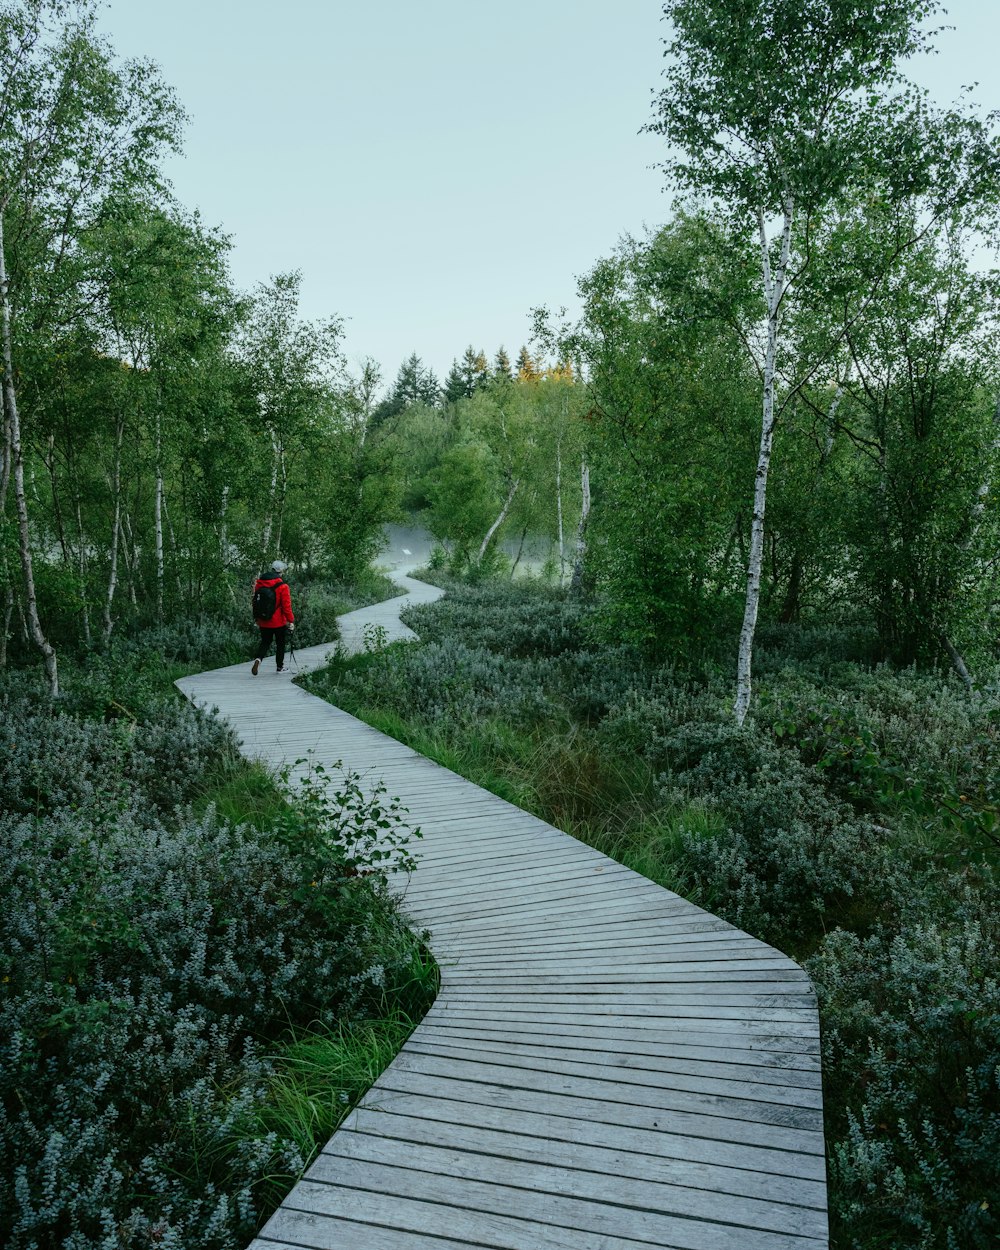 person in red jacket walking on wooden pathway